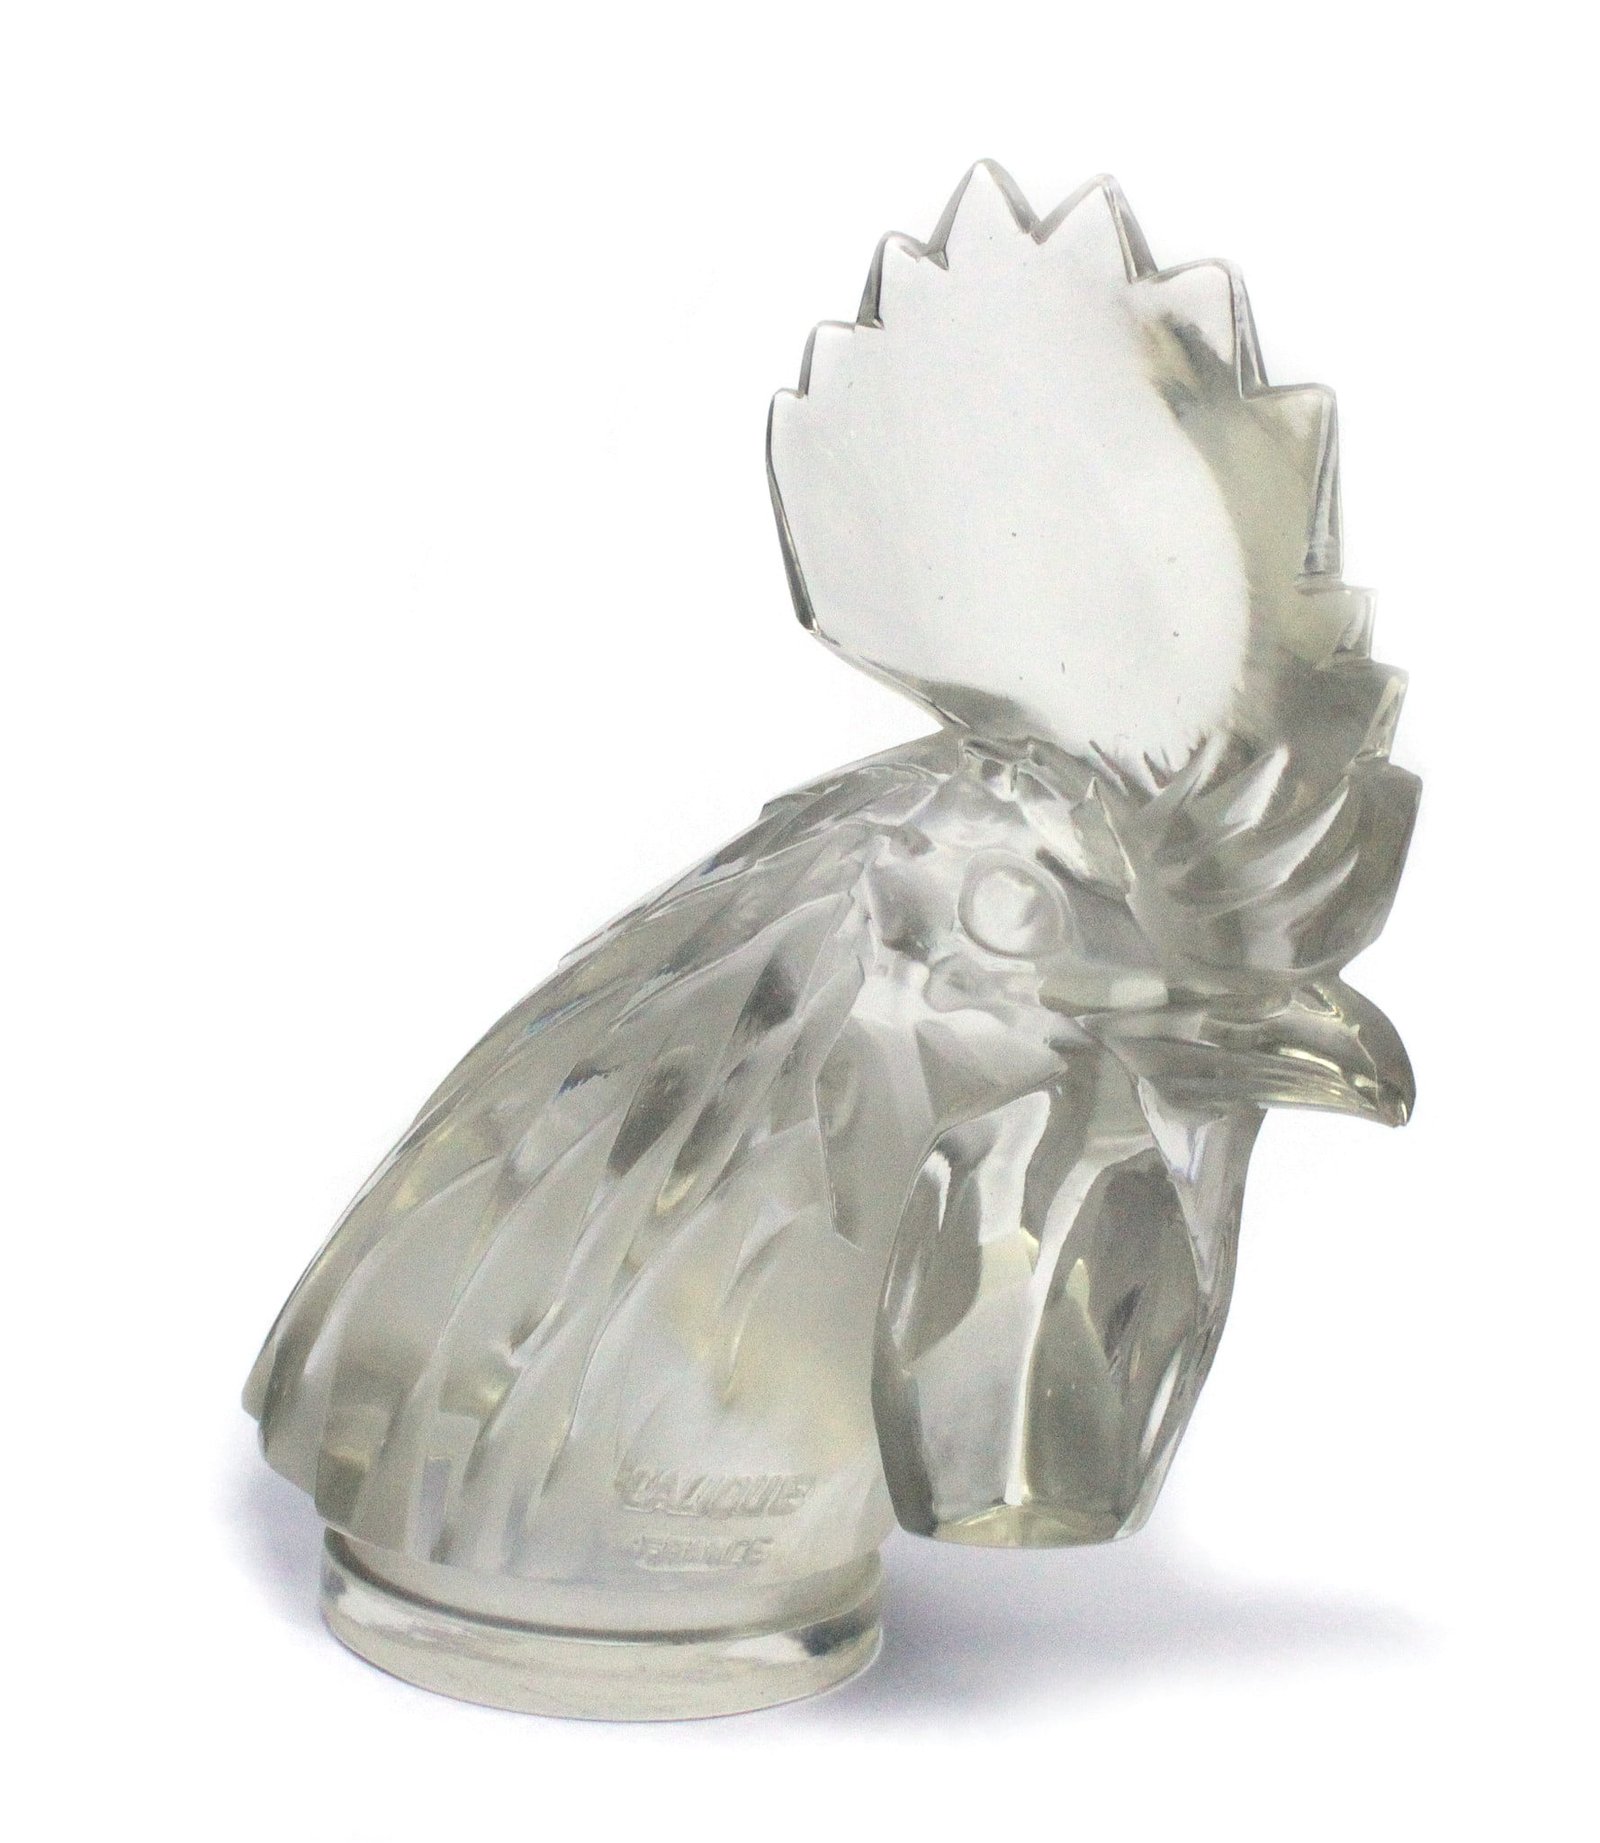 Famous glass car mascot by renowned glassmaker René Lalique. Introduced in 1928 with the name Tête de Coq, this amazing rooster's head in glass is a truly art on wheels. Measures 16cm x 15cm aprox. Very good condition. Large peak on backside of crest seems to have been polished at some point in history, now featuring two peaks. Signed Lalique France in the correct moulded signature.